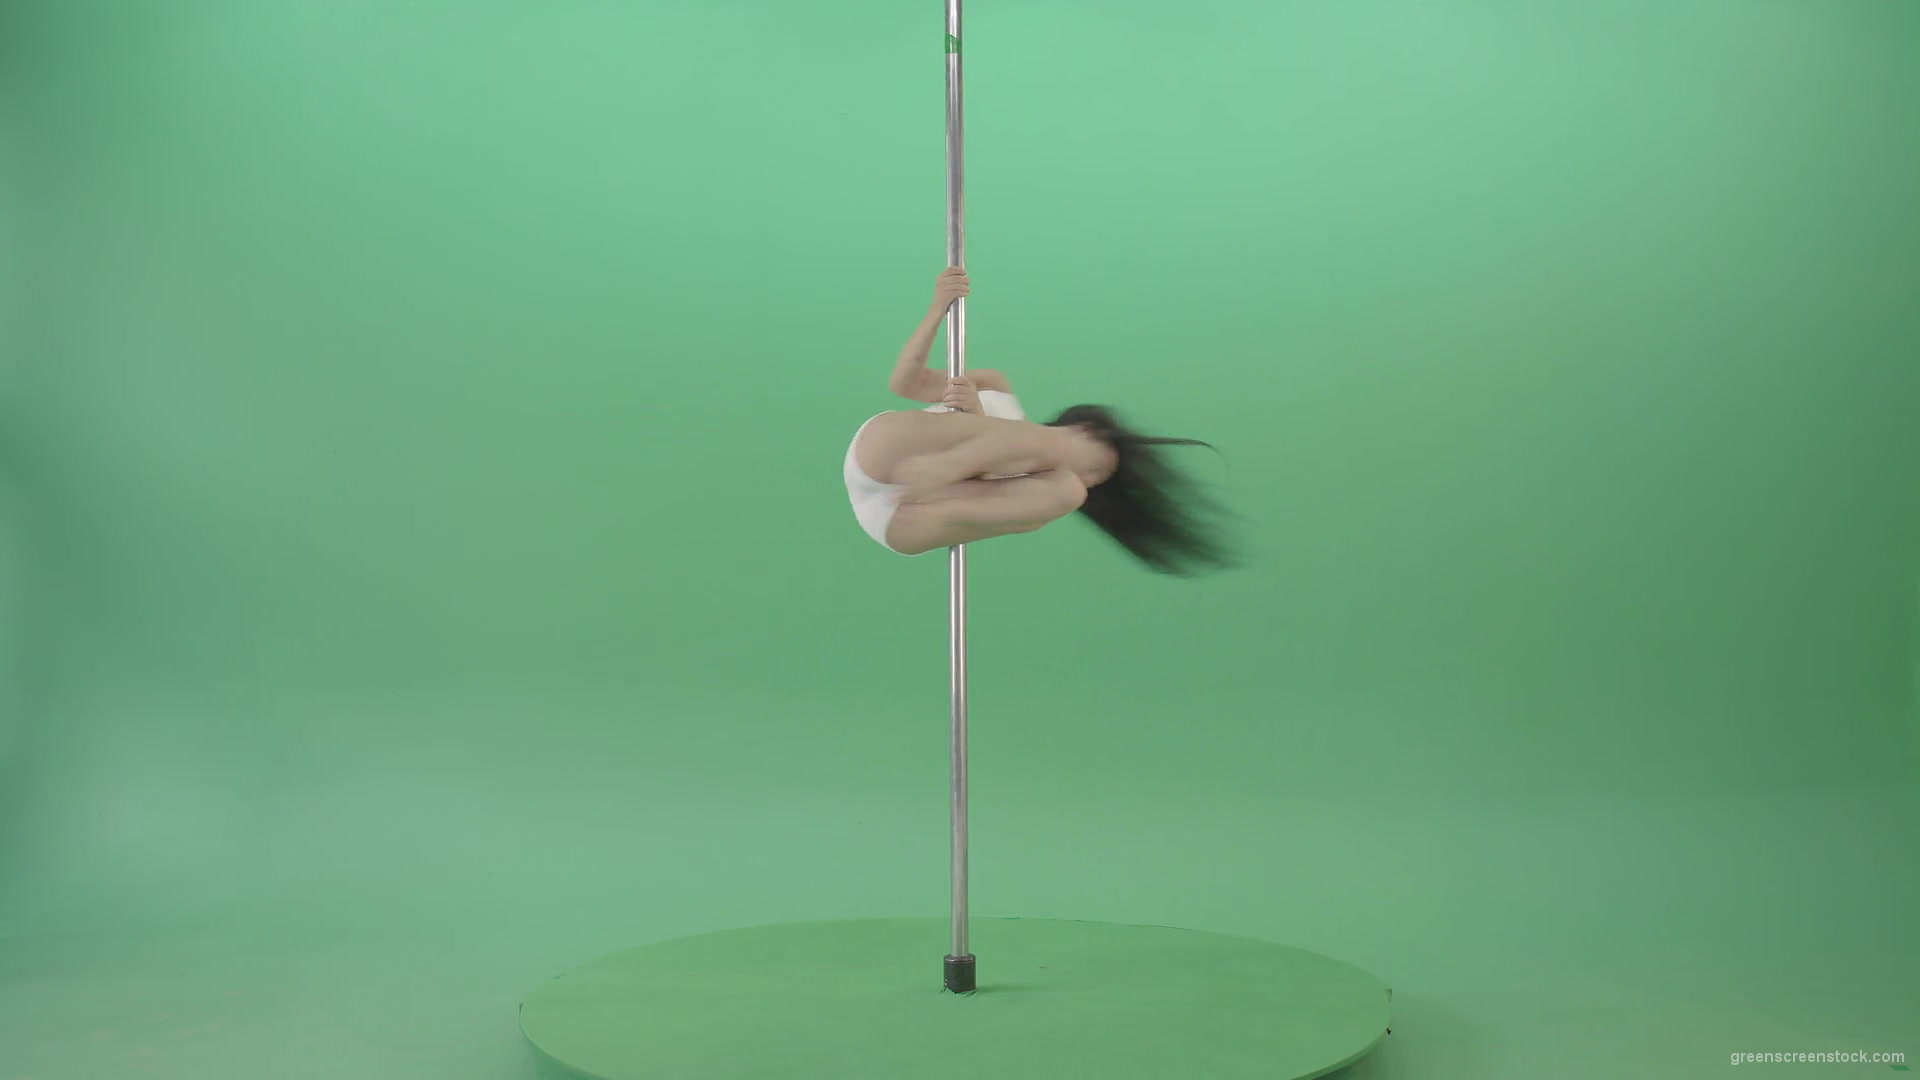 Go-Go-Girl-in-white-dress-spinning-on-the-pole-and-sit-on-a-twine-on-green-screen-4K-Video-Footage-1920_006 Green Screen Stock